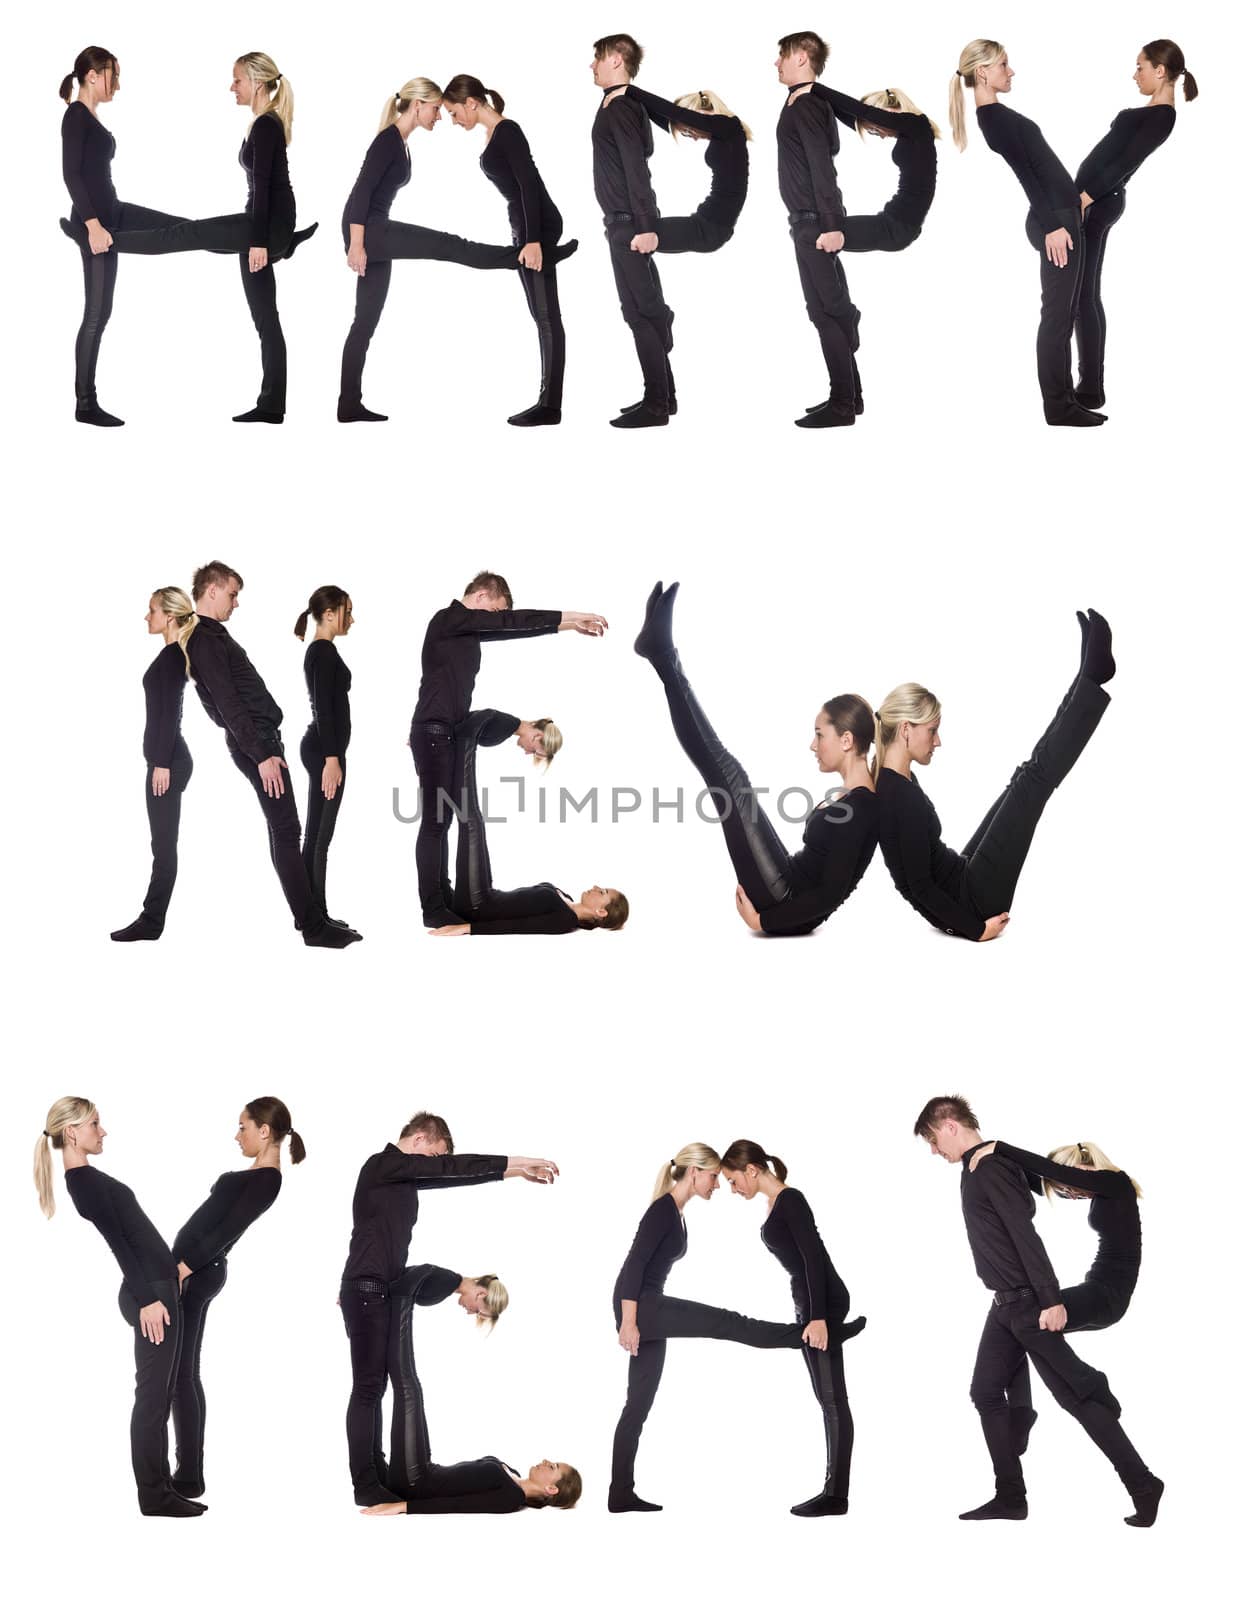 Group of people forming the phrase 'Happy new year', isolated on white background.